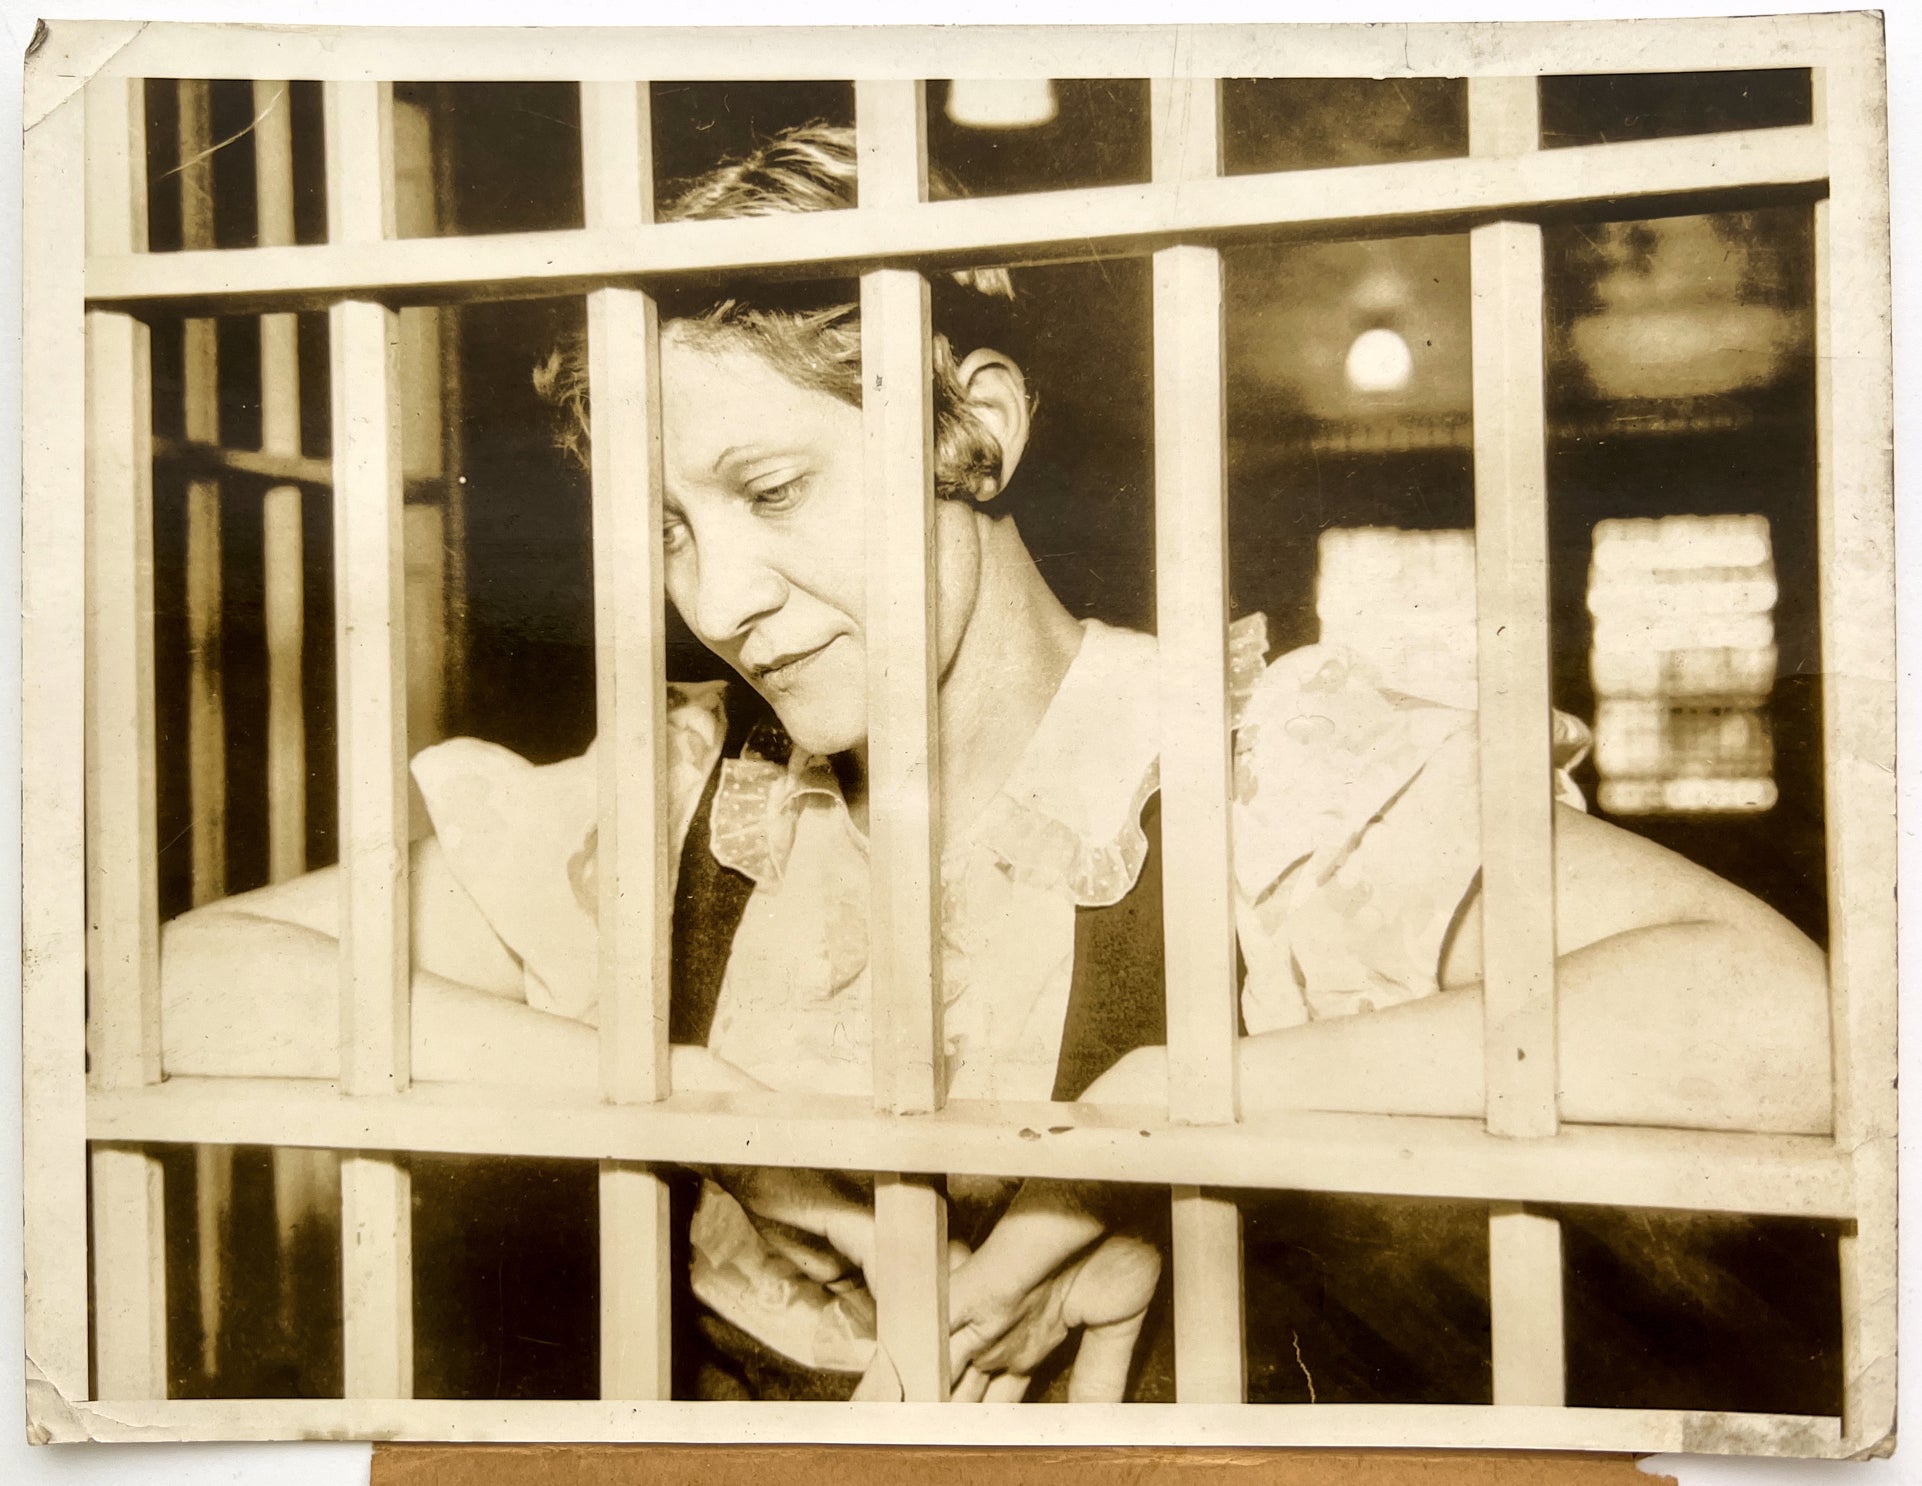 Press Photograph of Mrs. Bessie Opas, conspired to kill her husband ("Woman Behind Bars")